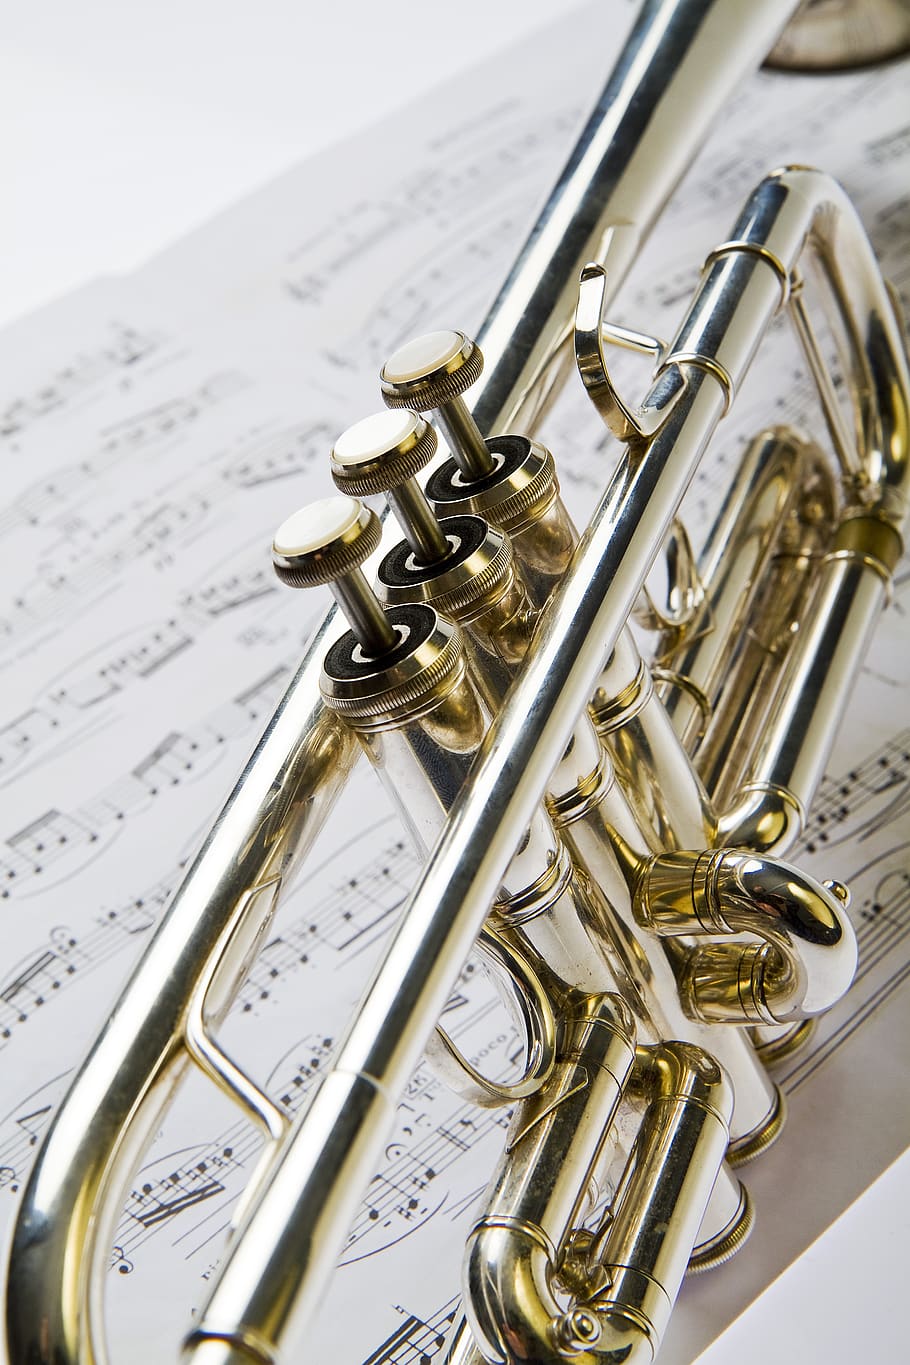 music, trumpet, notes, instruments, musical instrument, metal, close-up, arts culture and entertainment, sheet, still life